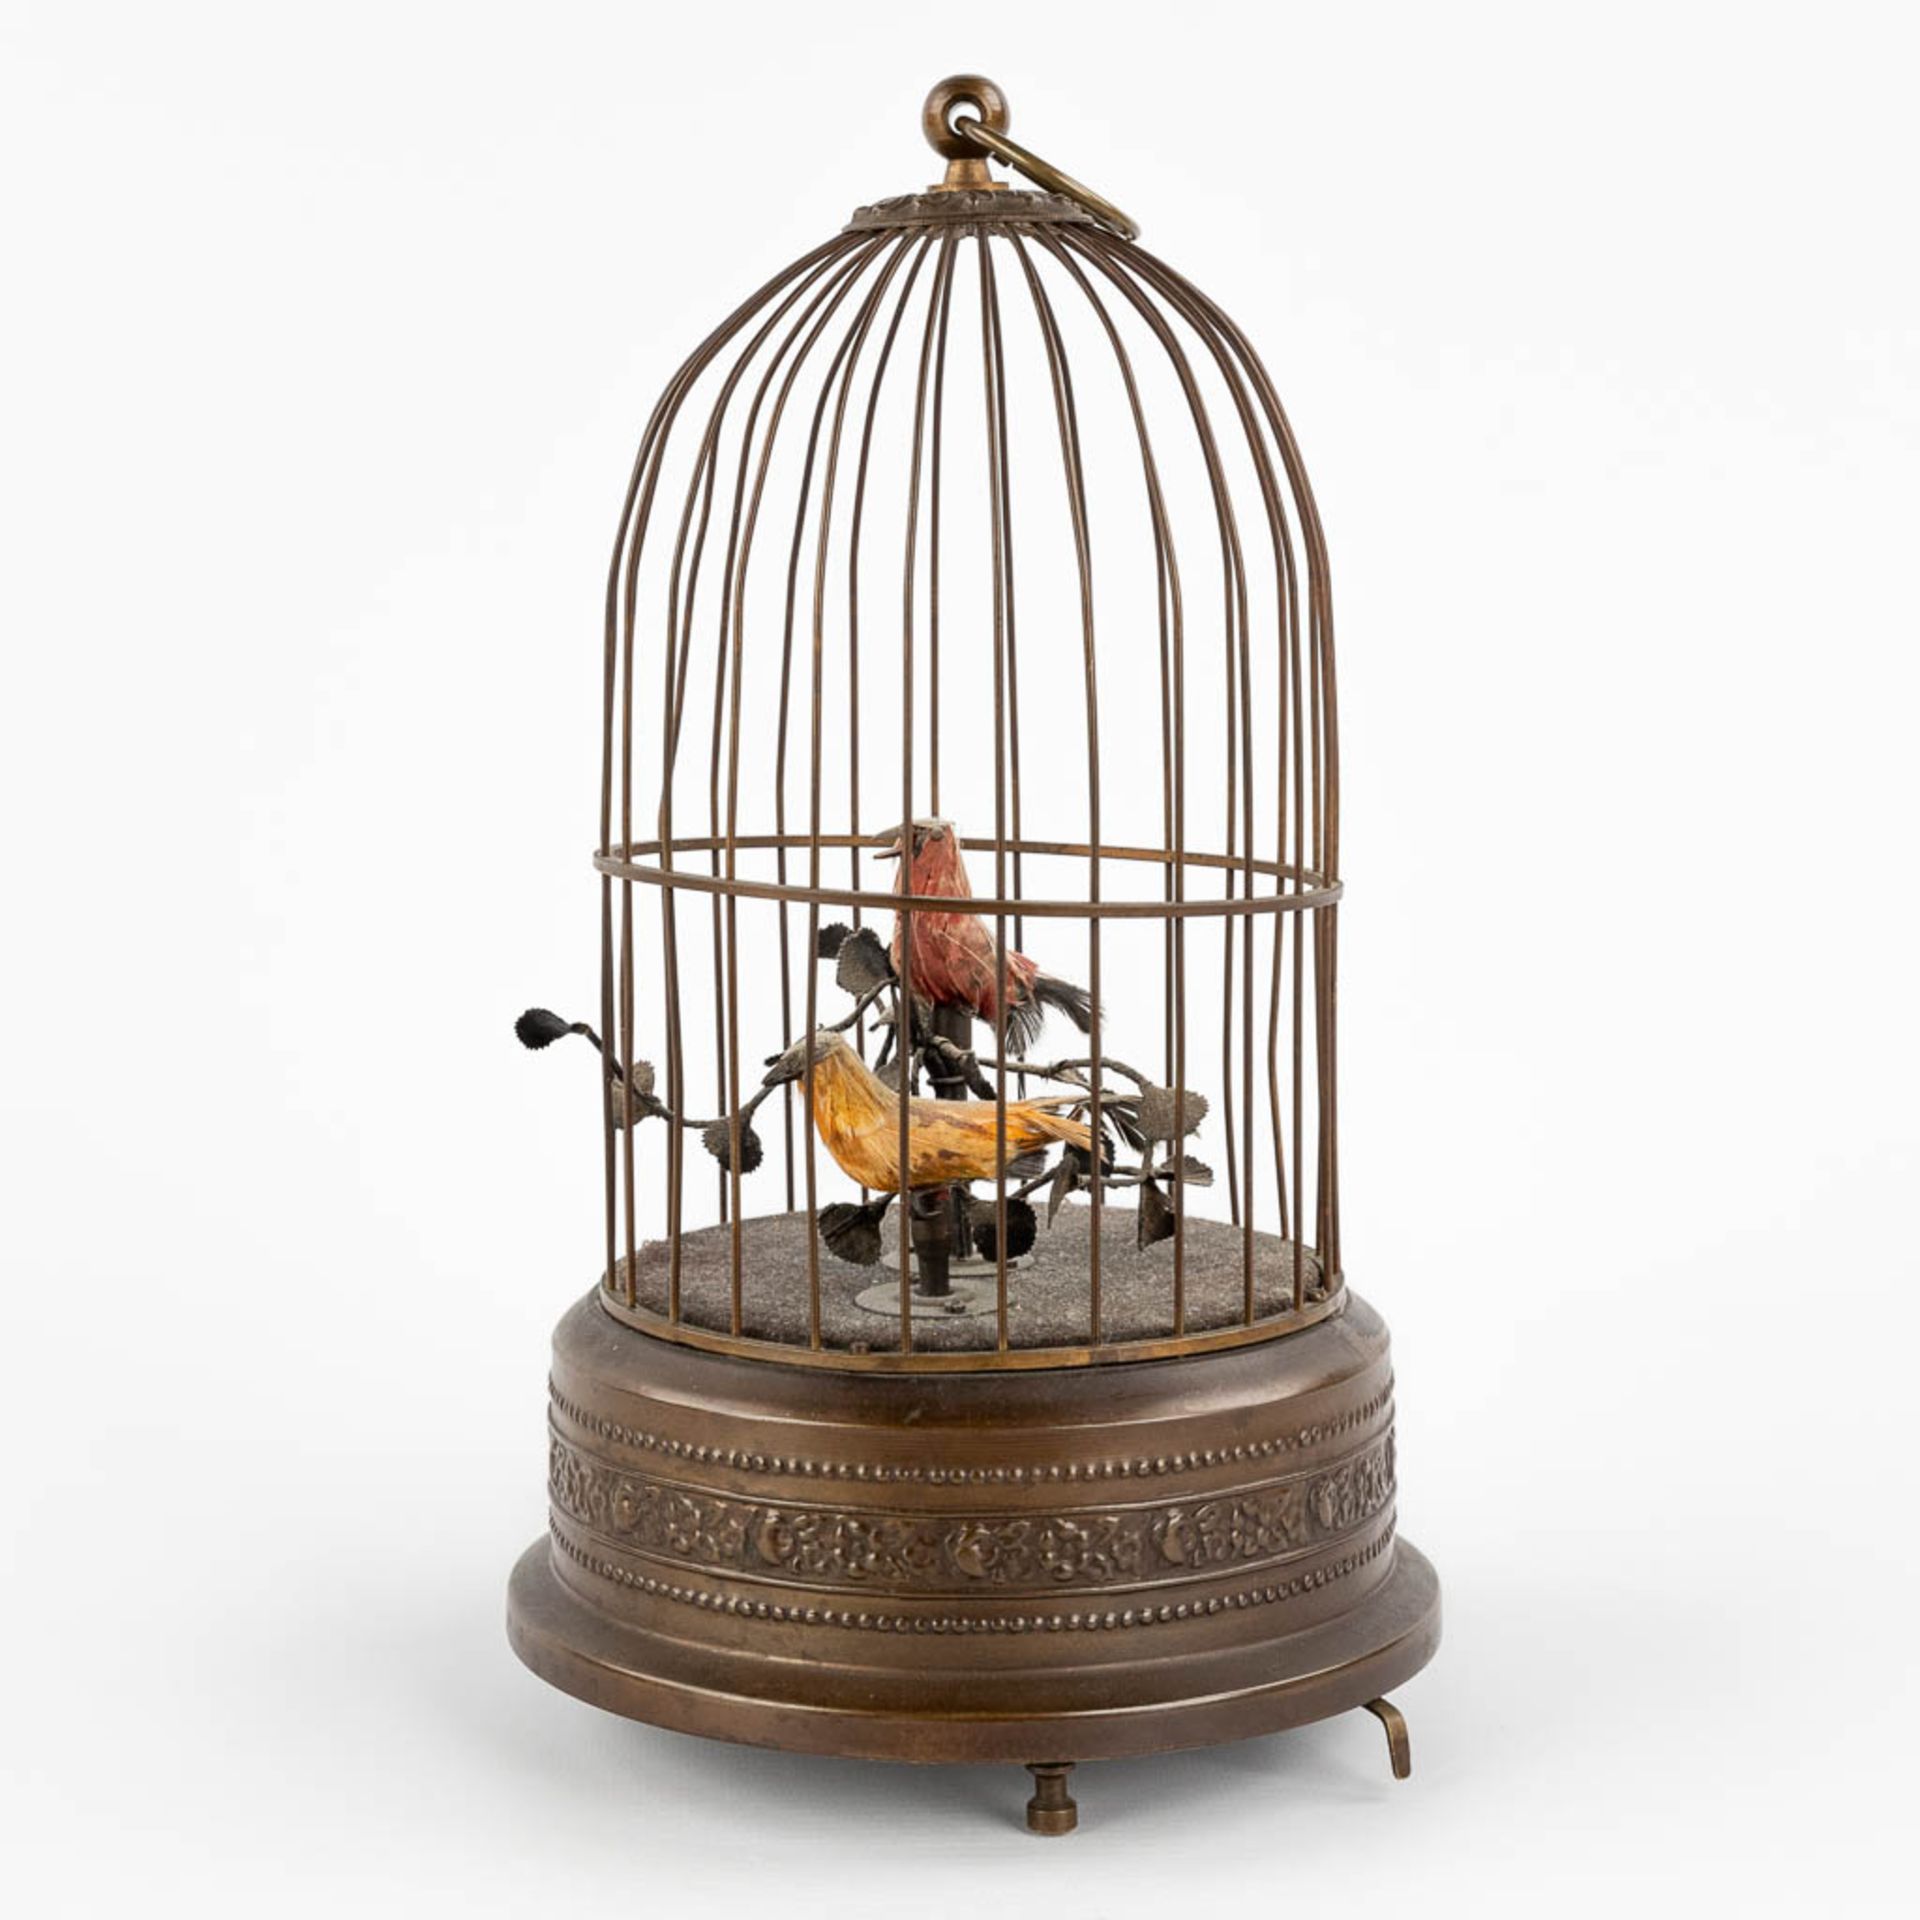 A bird cage automata with a music box. (H:28 x D:15,5 cm) - Image 6 of 12